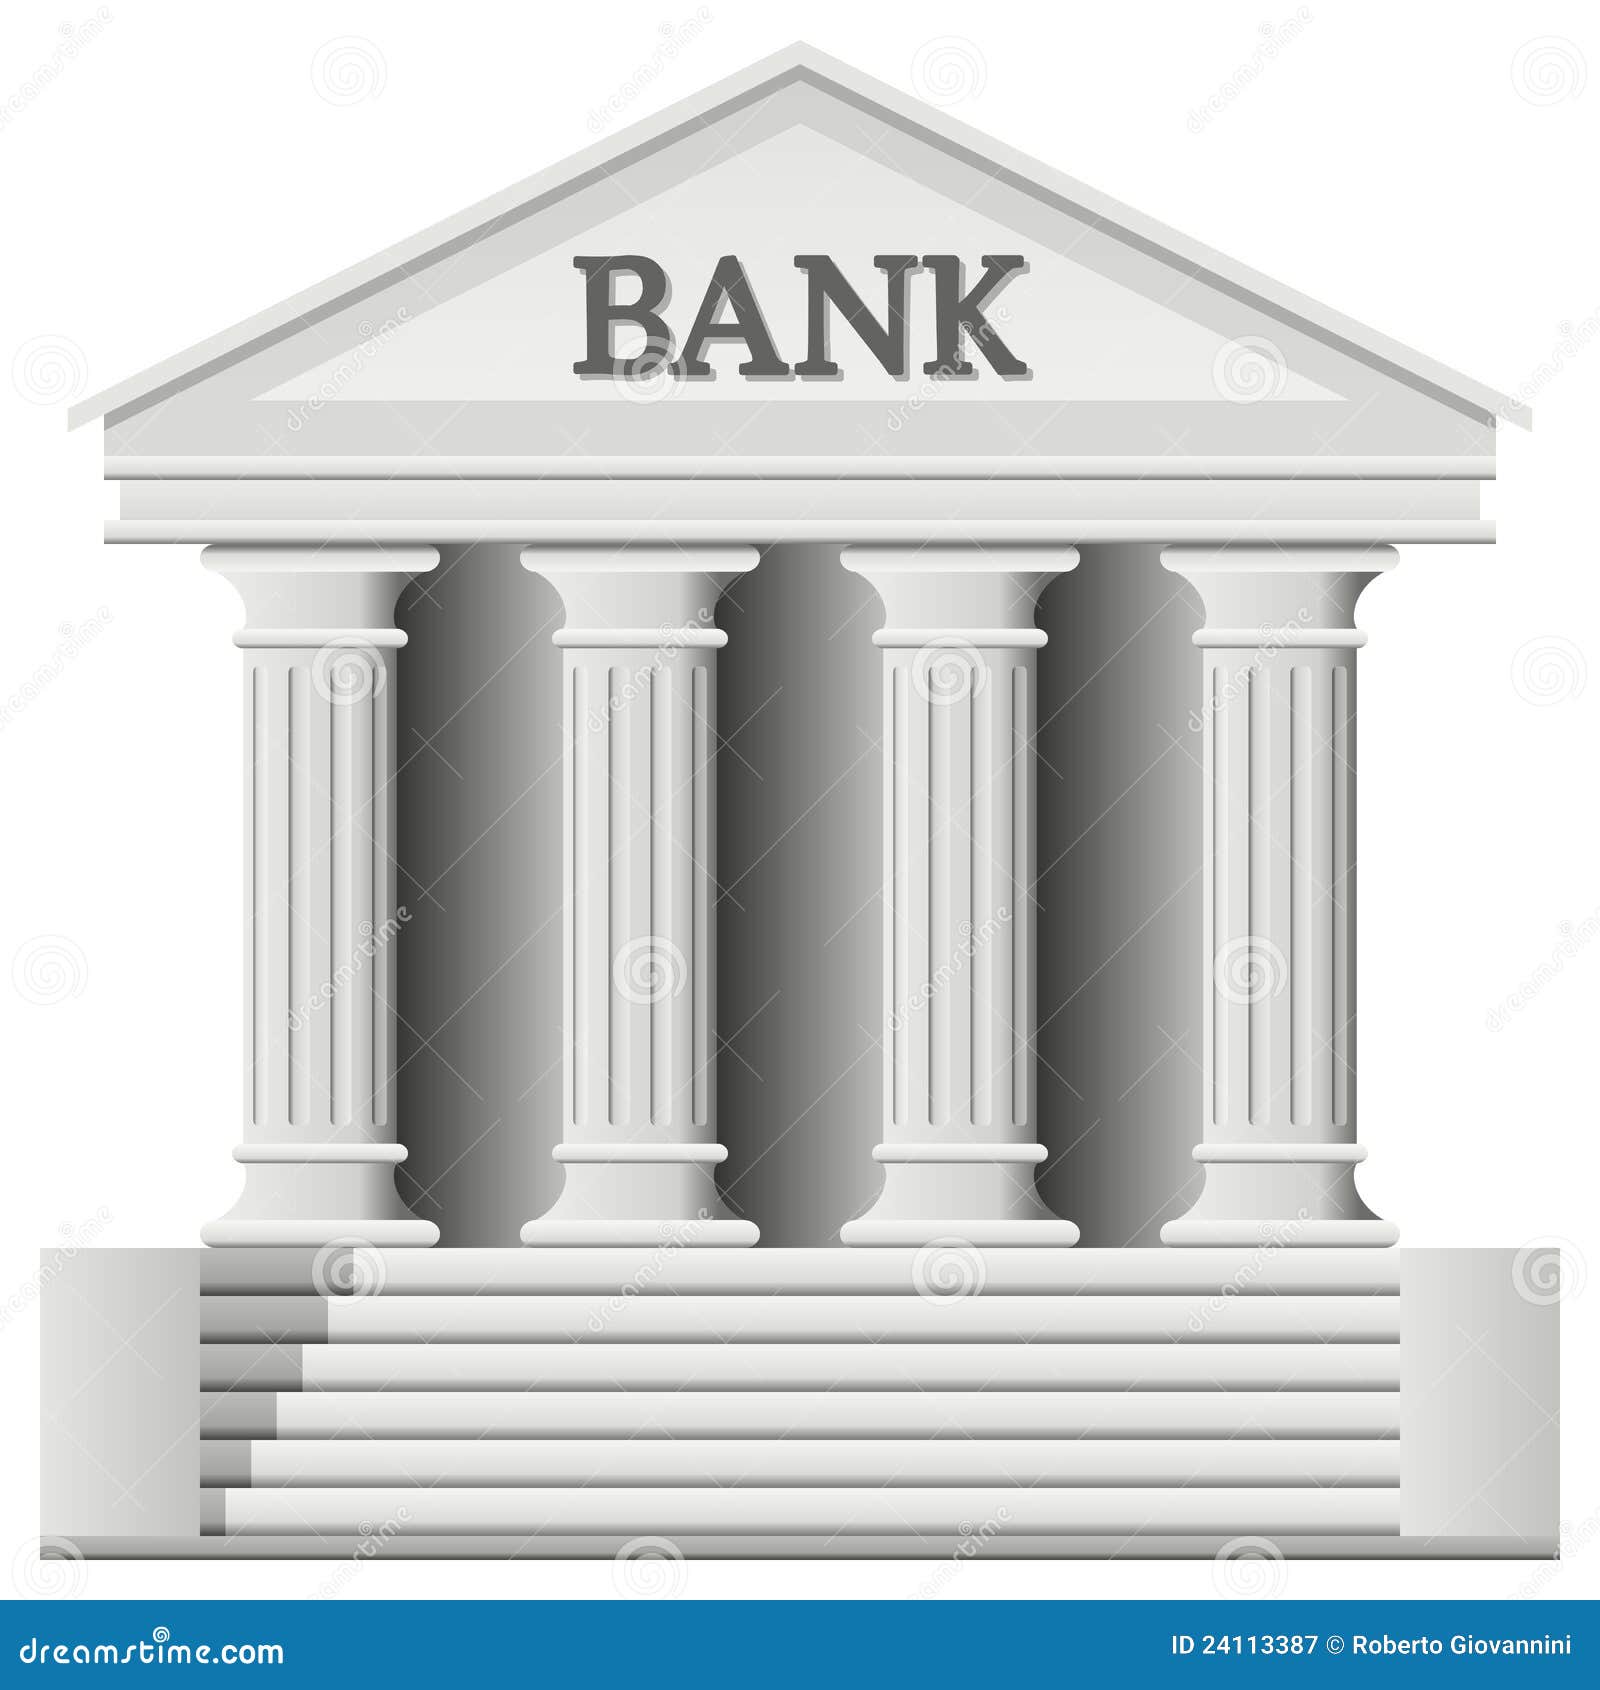 bank clipart black and white - photo #20